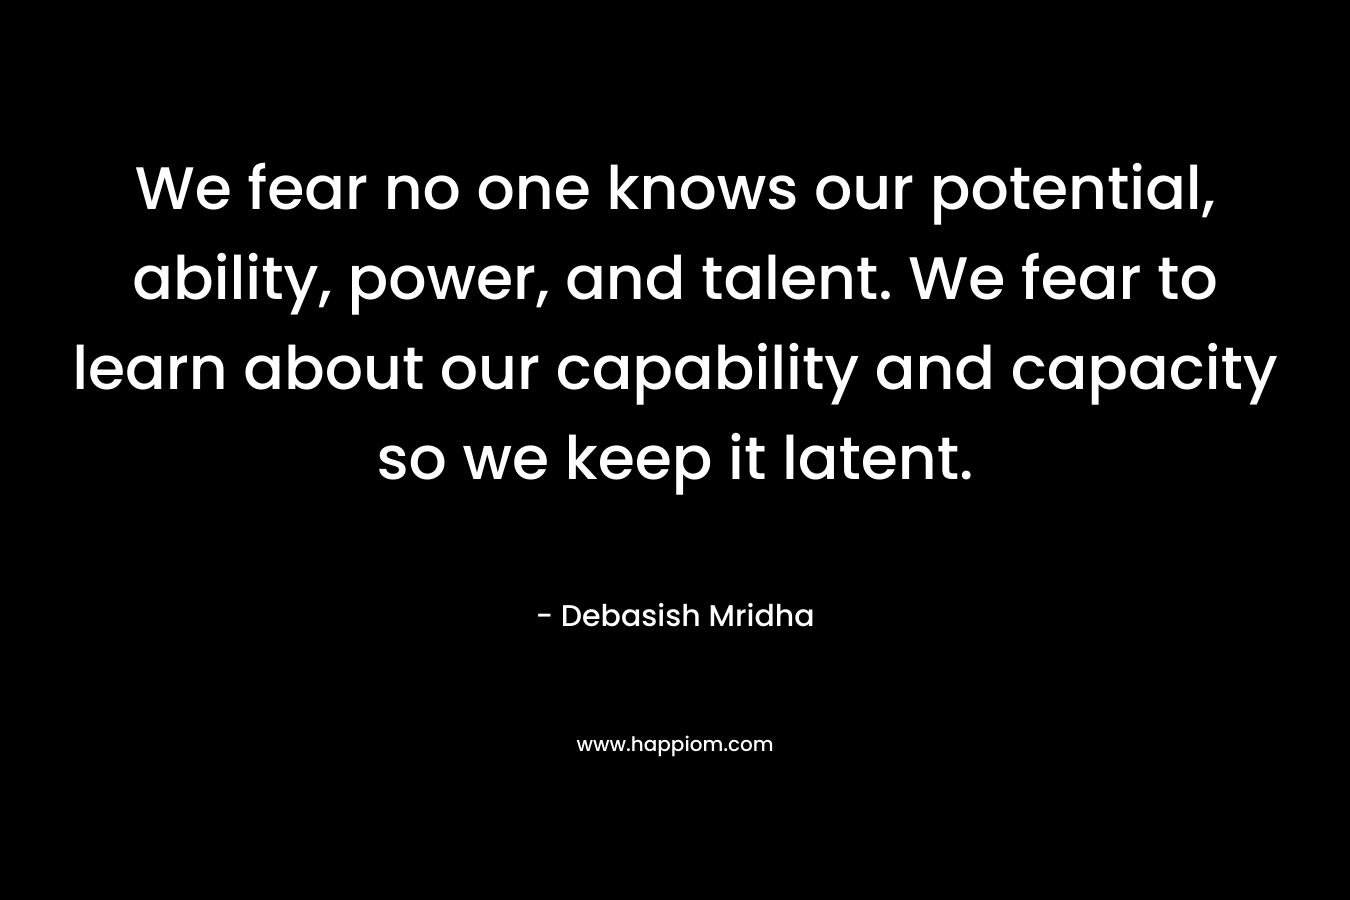 We fear no one knows our potential, ability, power, and talent. We fear to learn about our capability and capacity so we keep it latent. – Debasish Mridha